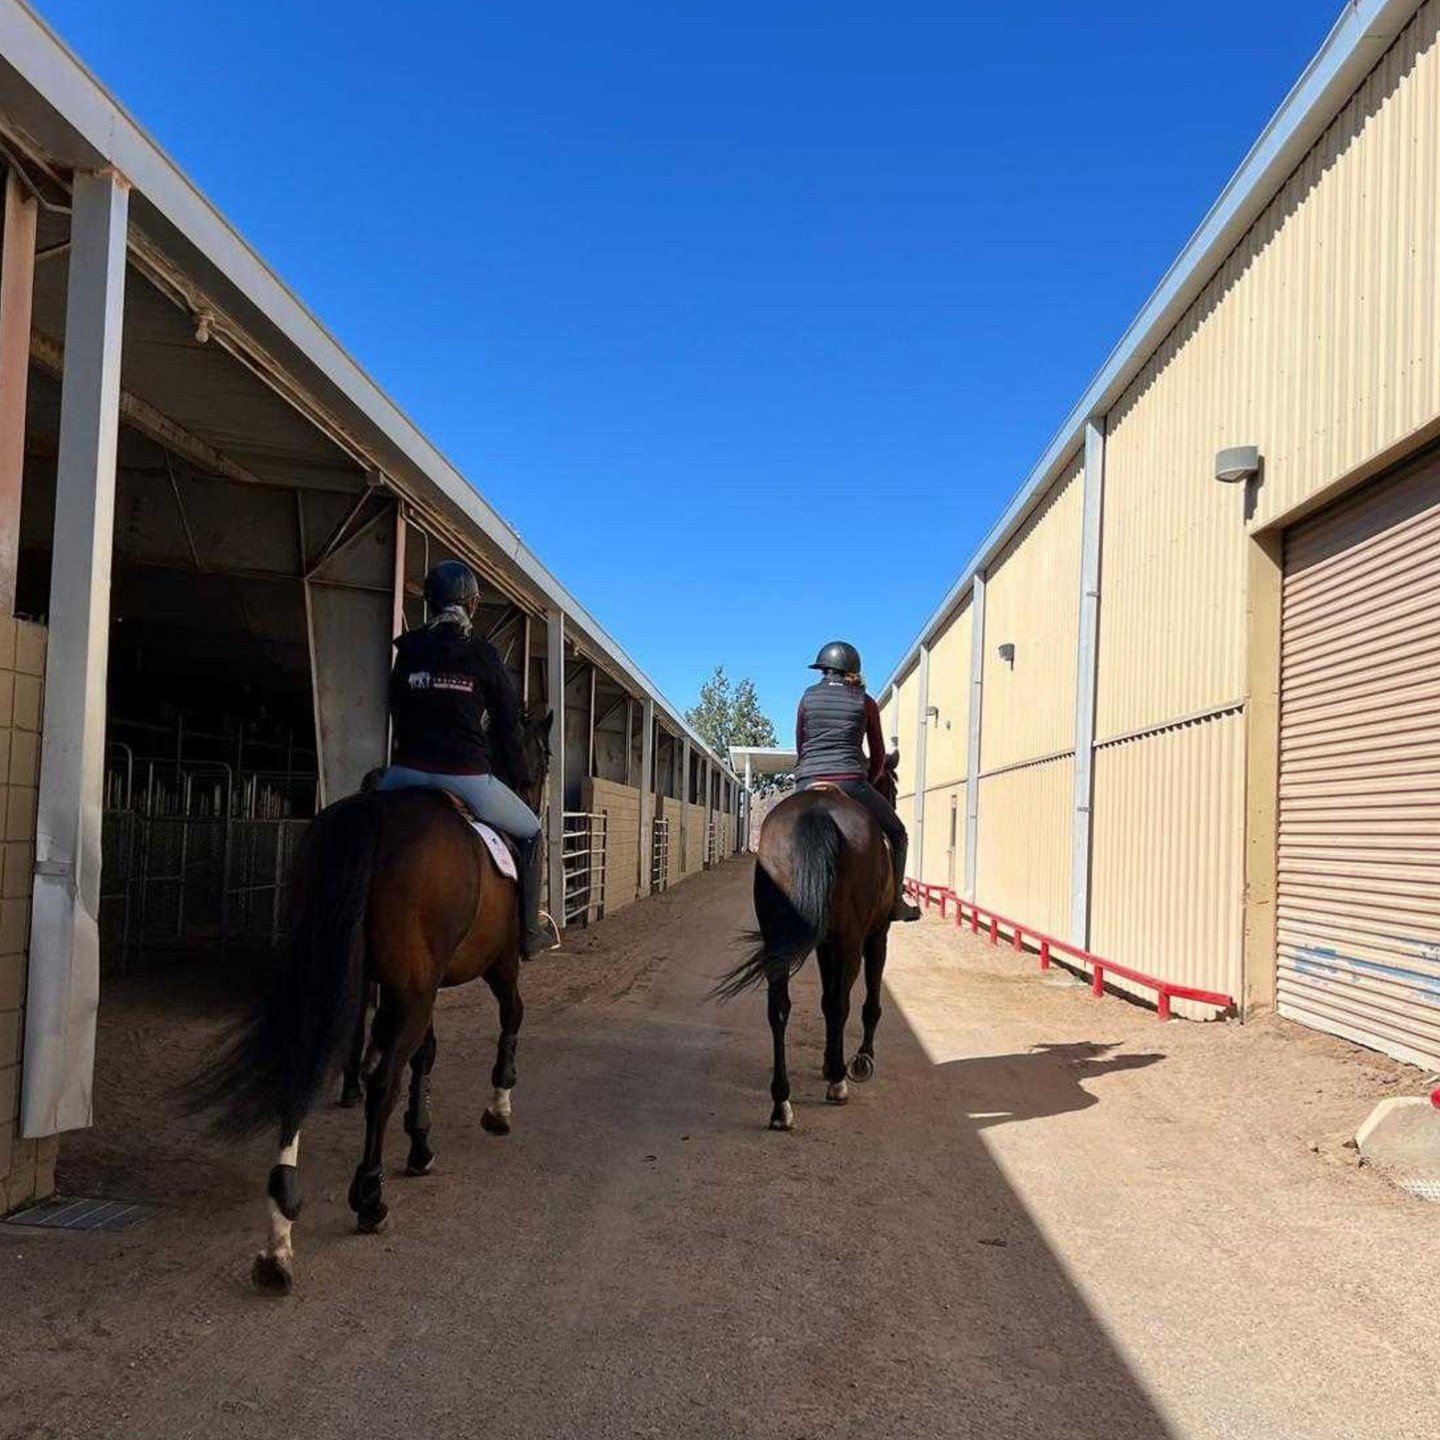 Wally is feeling very excited for his first trip off-property! Wally and Jasmine have headed to their first training show with @nmhunterjumper

_
#horsetrainer #vianova #positivereinforcement #horsesofinsragram